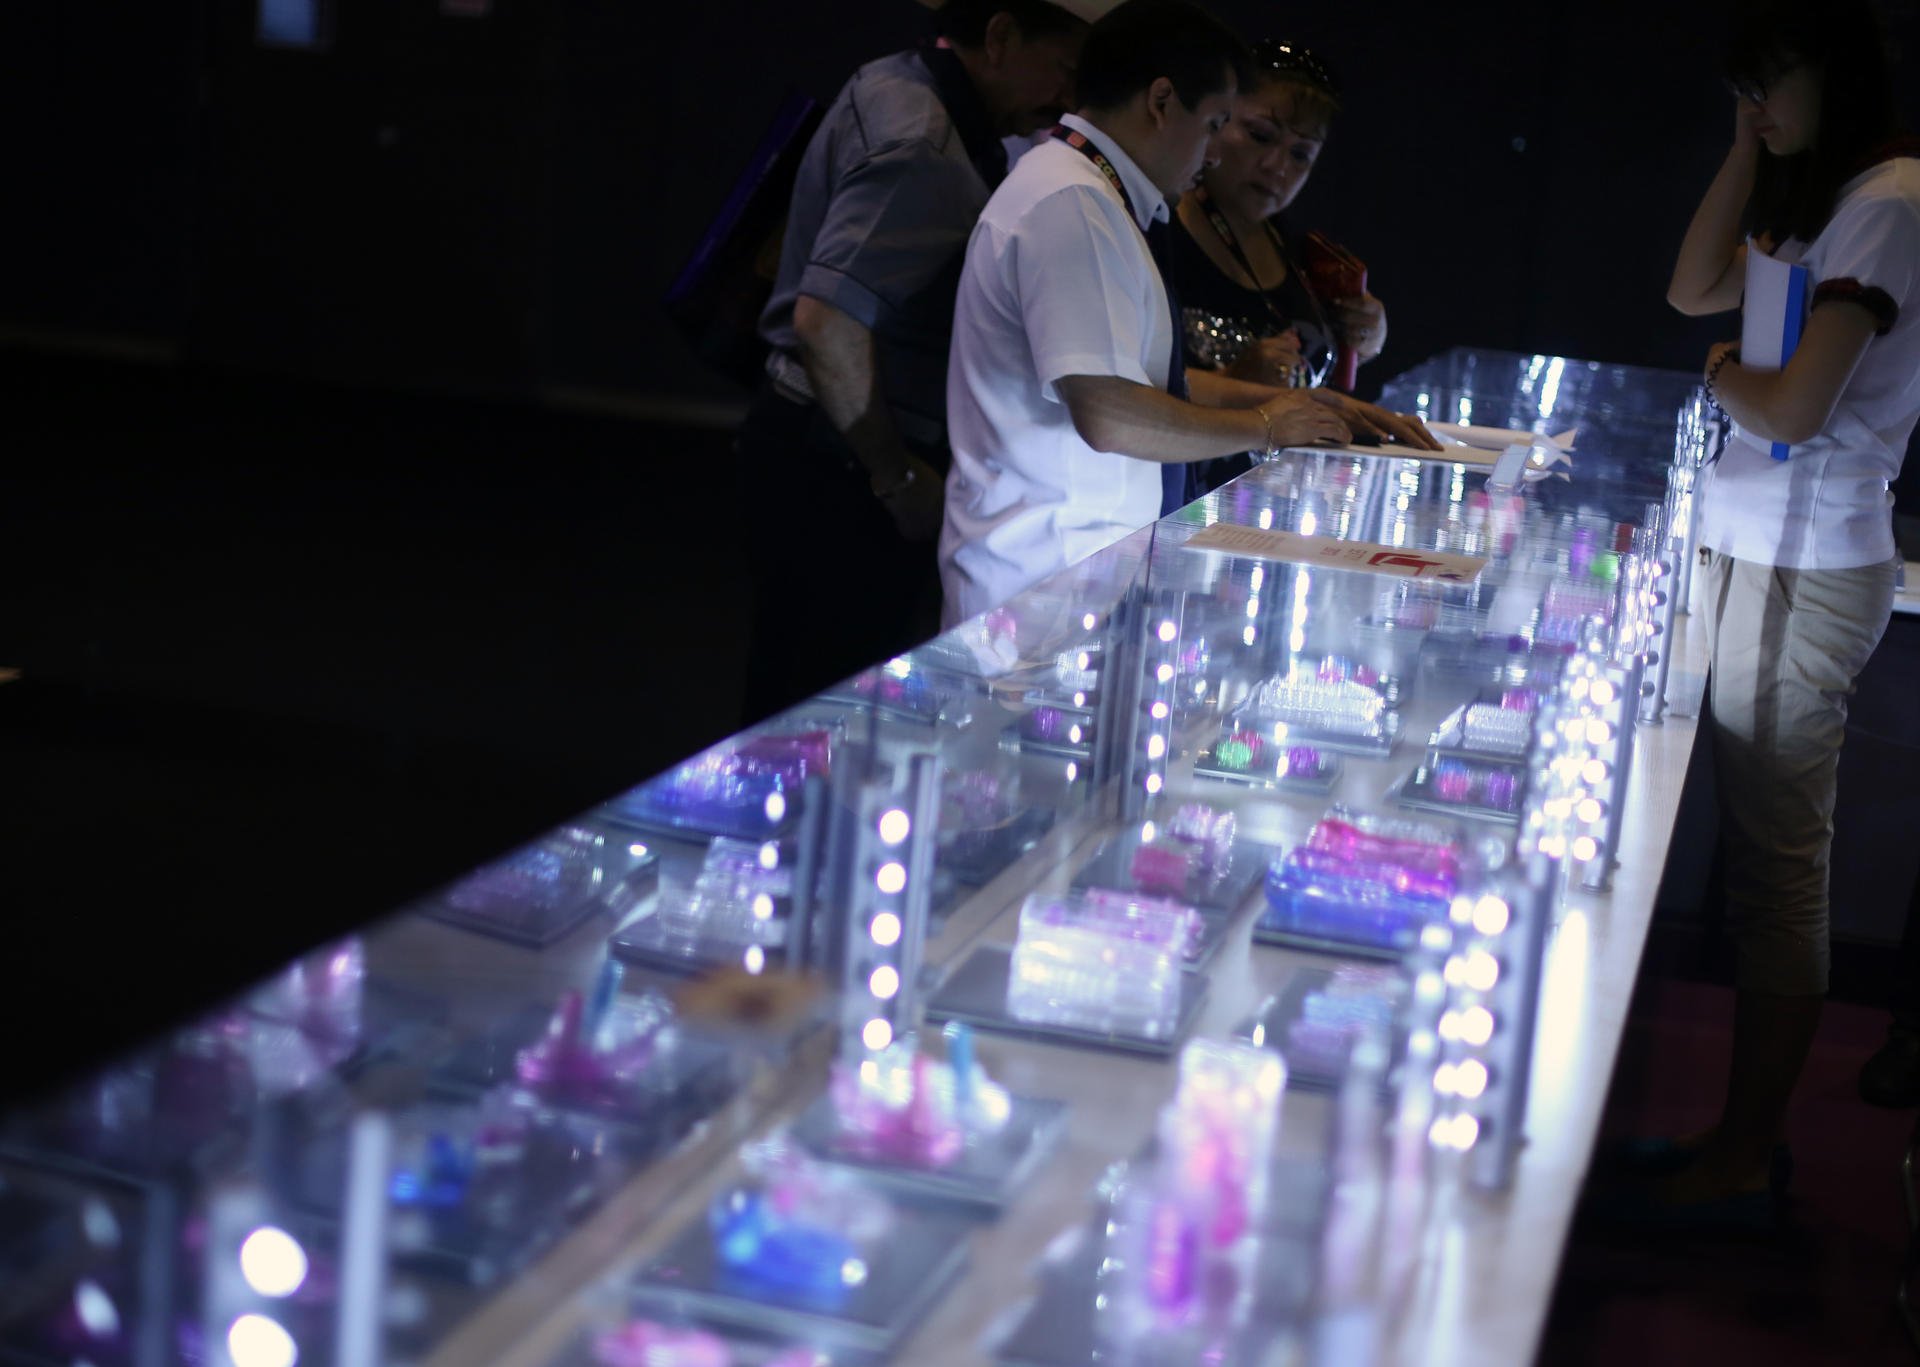 Sex toys have moved into the online hi-tech world. Photo: Sam Tsang